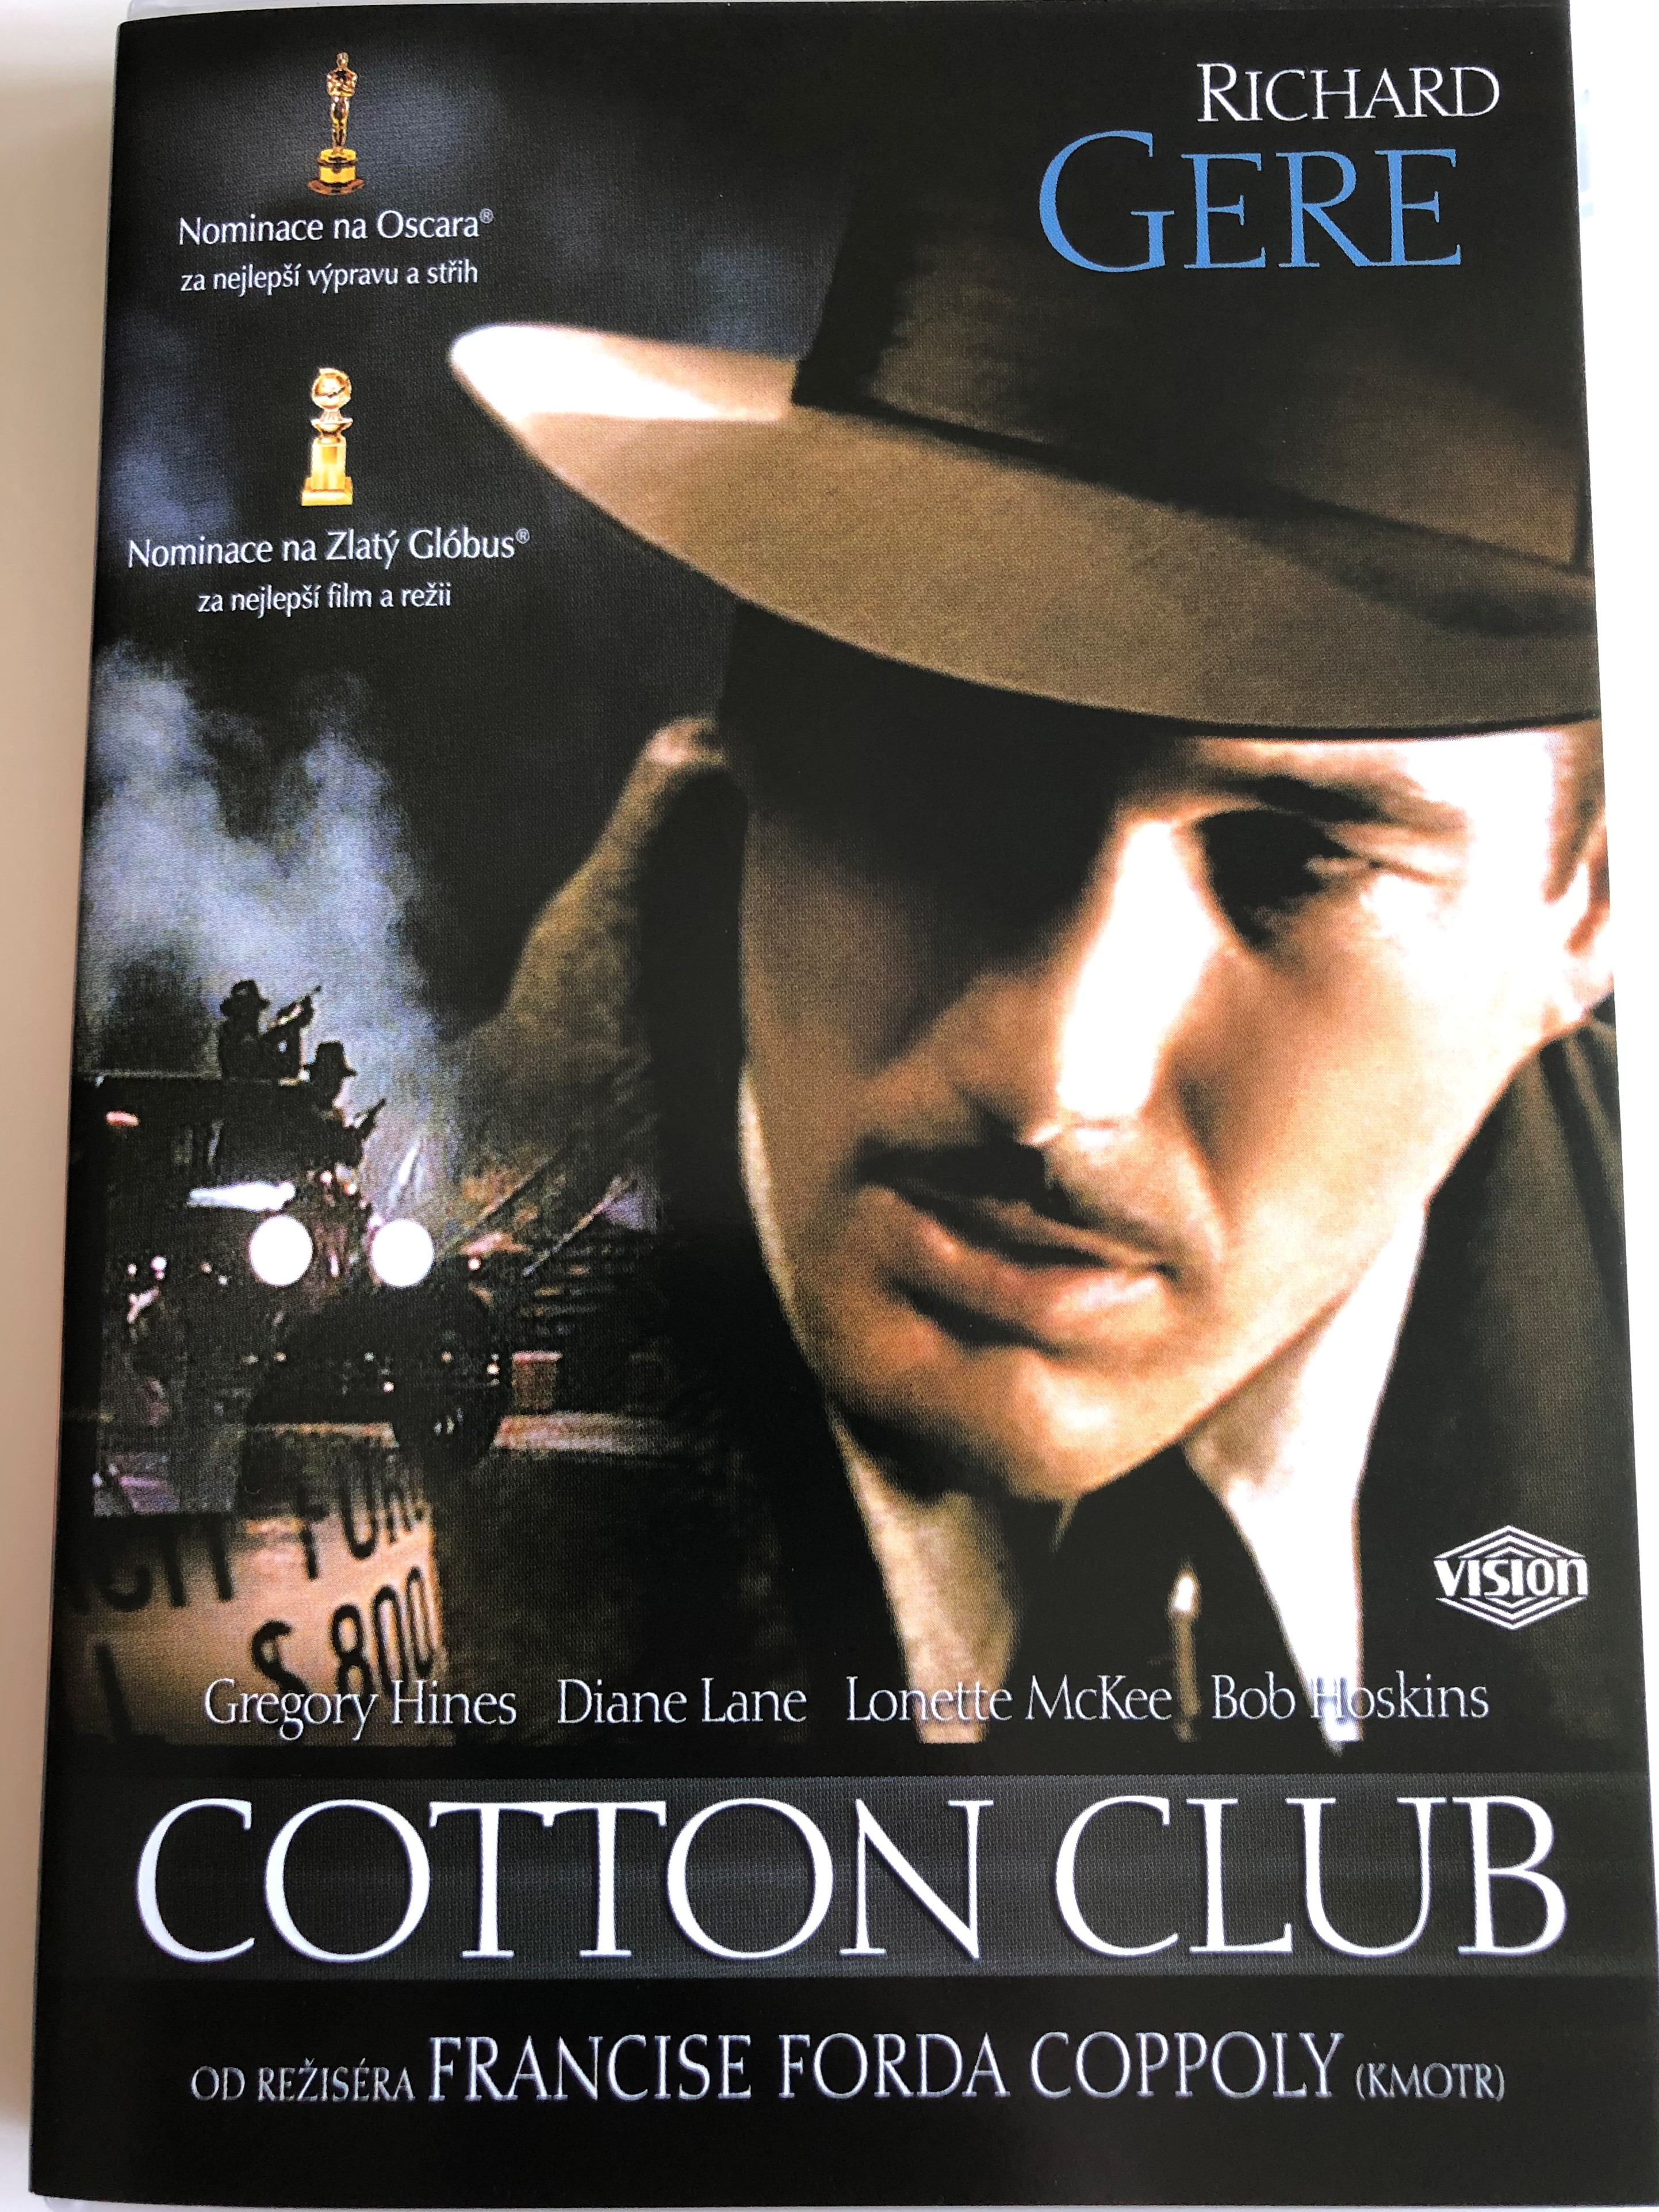 the-cotton-club-dvd-1984-directed-by-francis-ford-coppola-starring-richard-gere-diane-lane-lonette-mckee-bob-hoskins-james-remar-nicolas-cage-1-.jpg